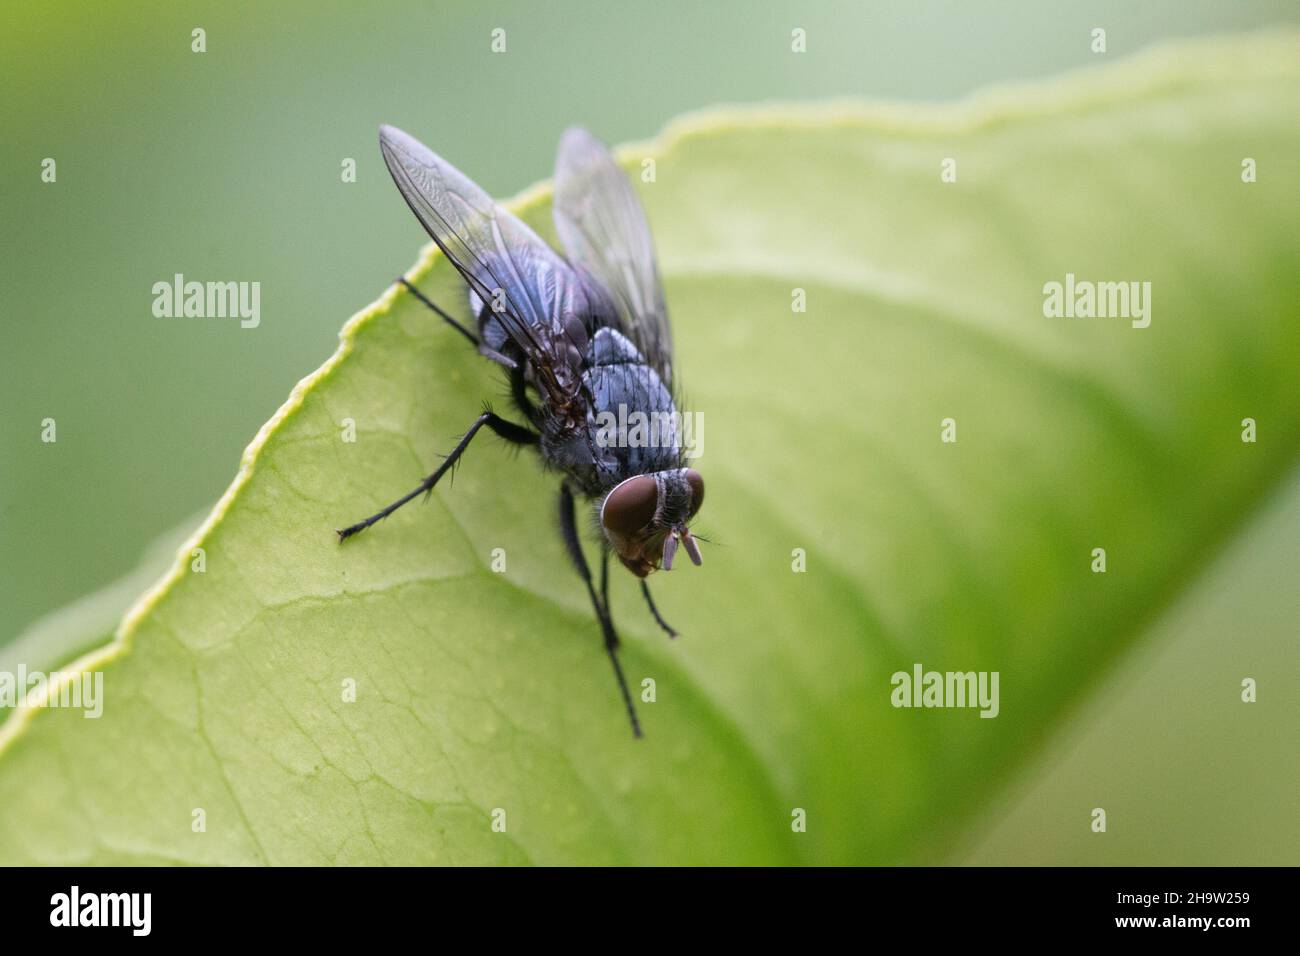 Close-up Macro of a common lesser house fly on a lemon tree leaf Stock Photo